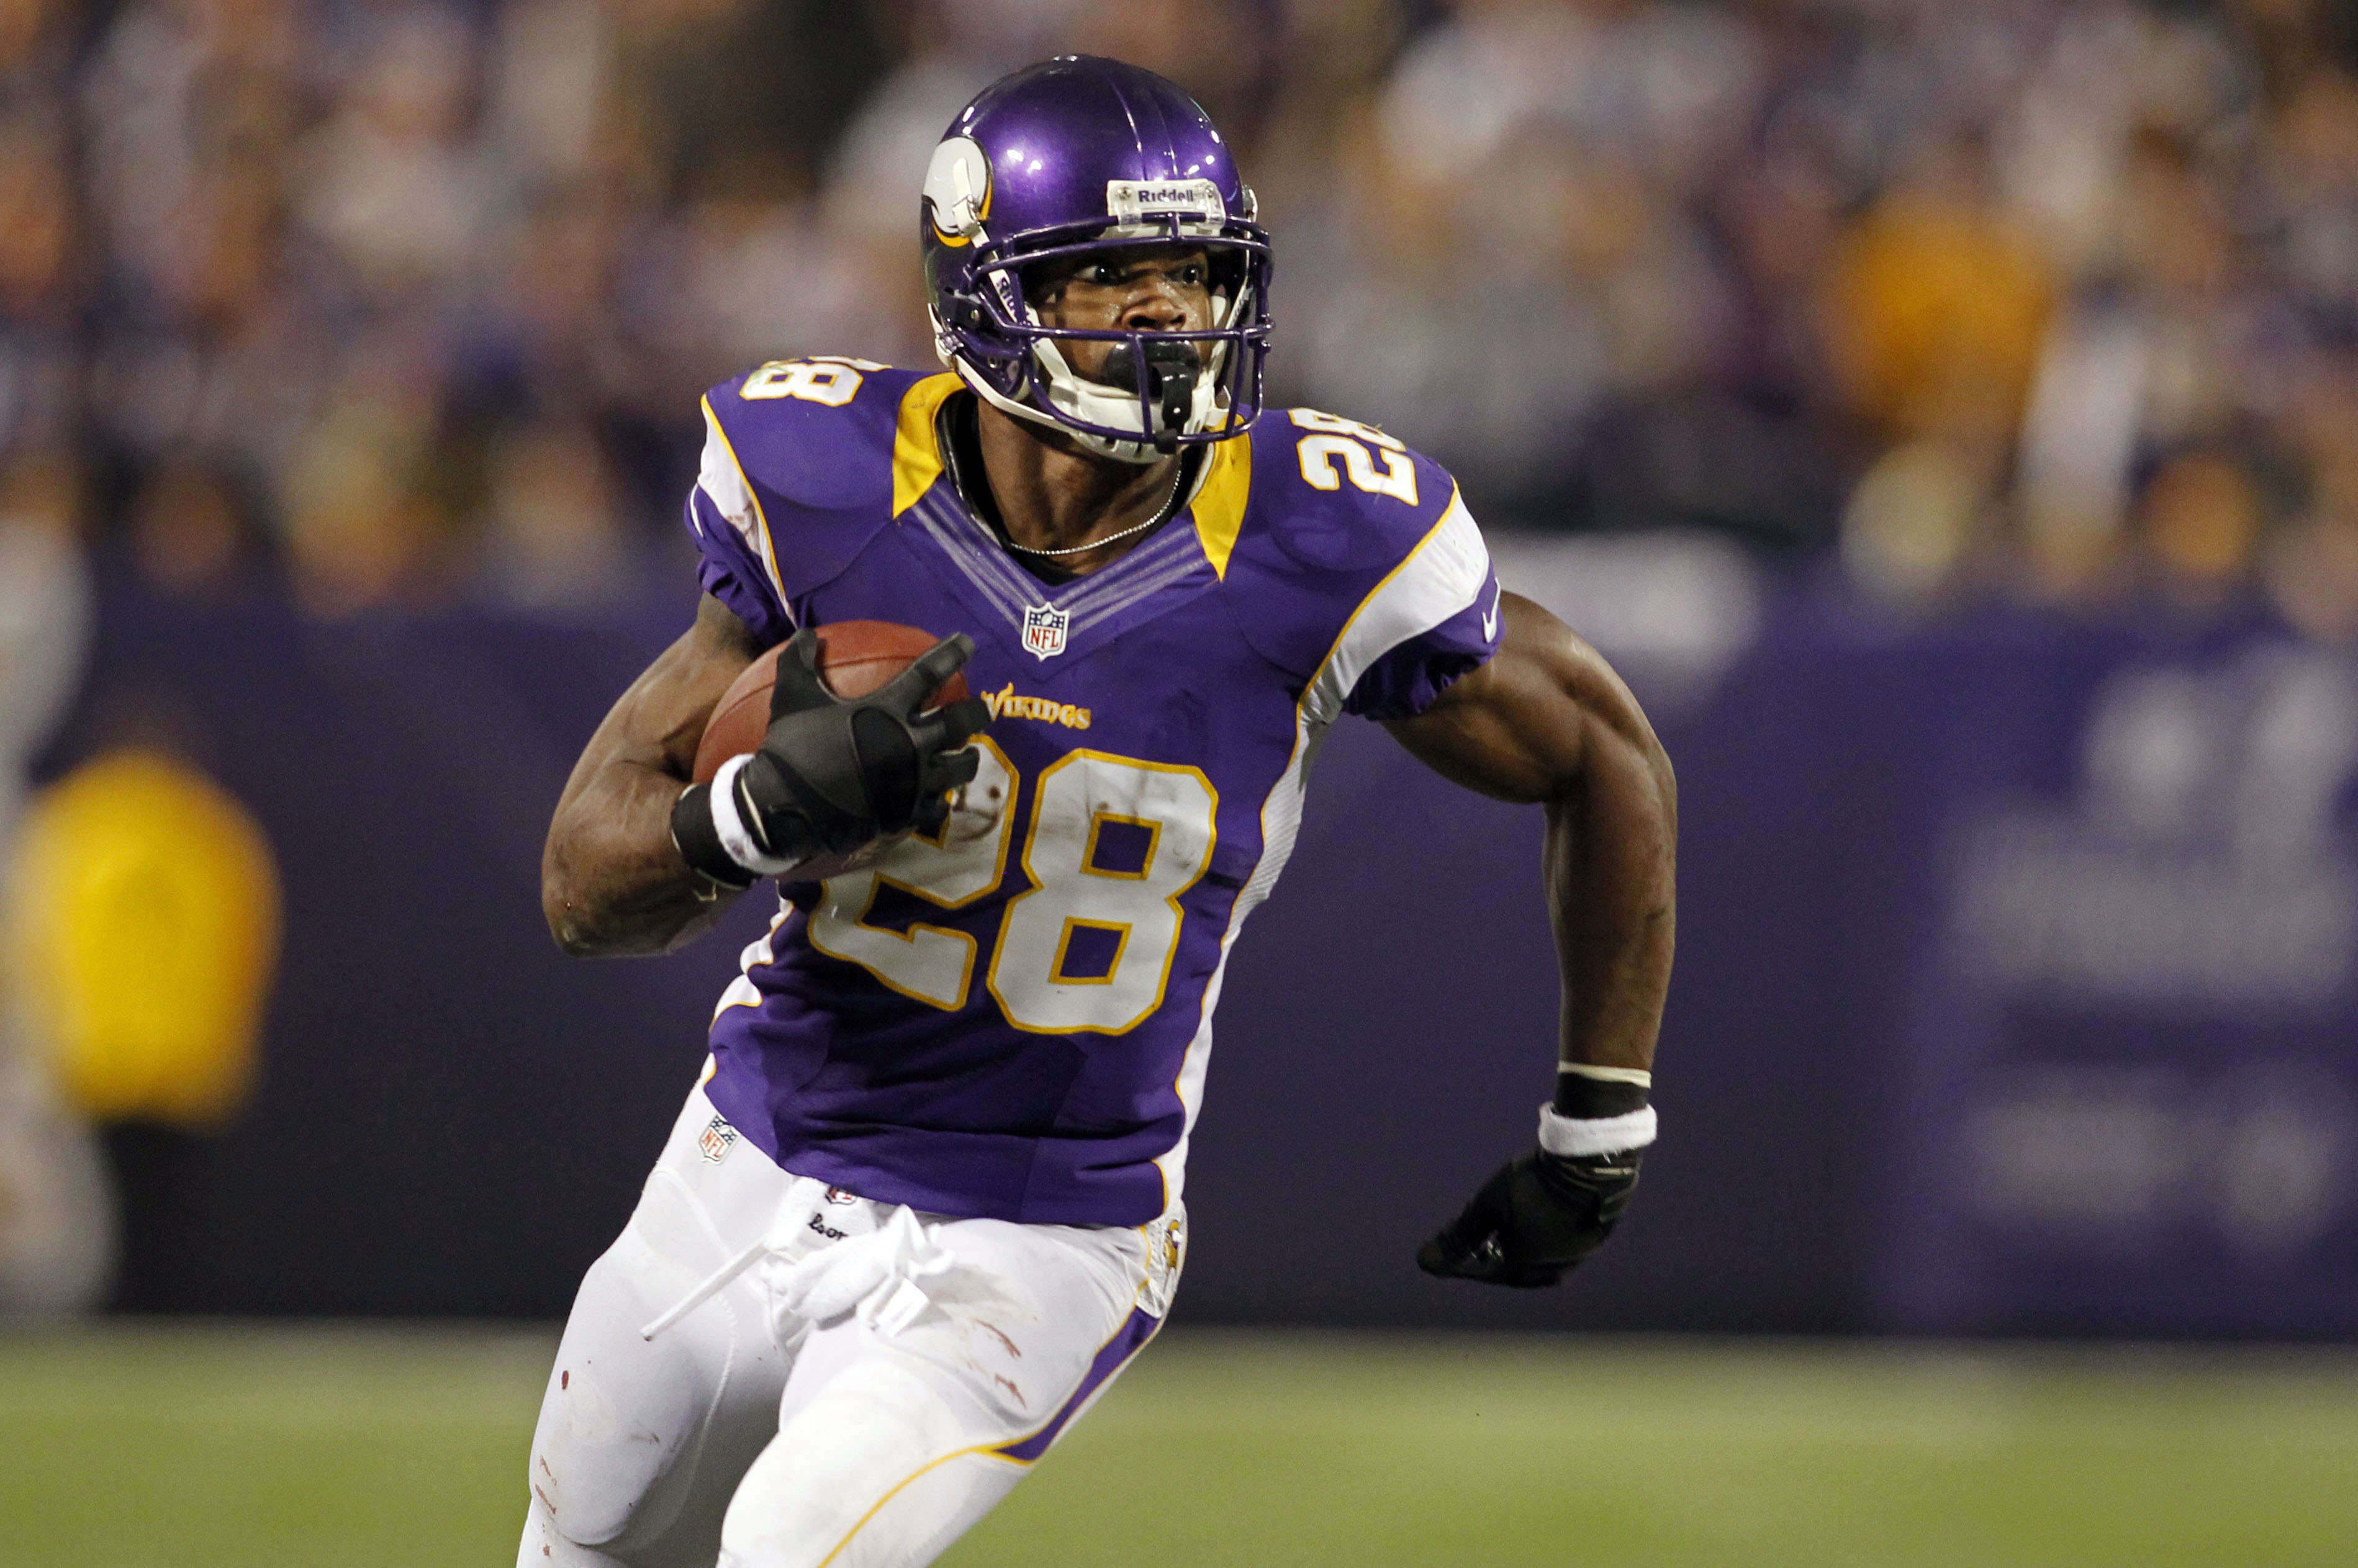 Adrian Peterson Wallpaper High Quality